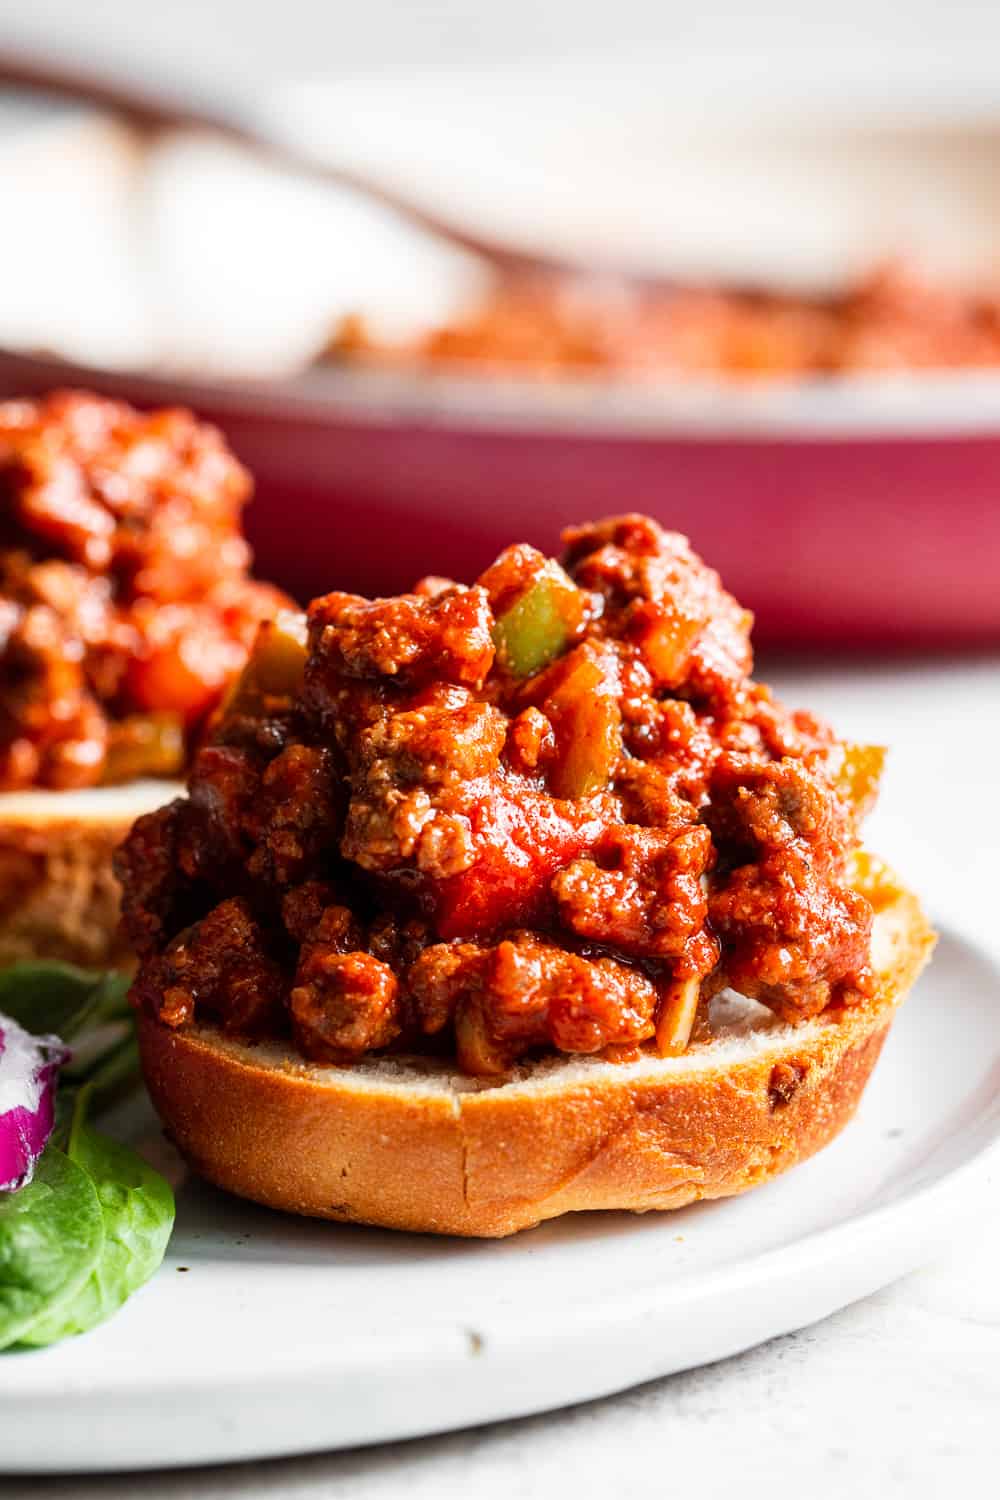 hese Paleo sloppy joes are classic comfort food made without the junk! The sauce is date sweetened to make it Whole30, and it's quick and easy enough for weeknight dinners.  Family approved and makes great leftovers, too!  Serve on paleo rolls or on sweet potato "buns"! #paleo #cleaneating 